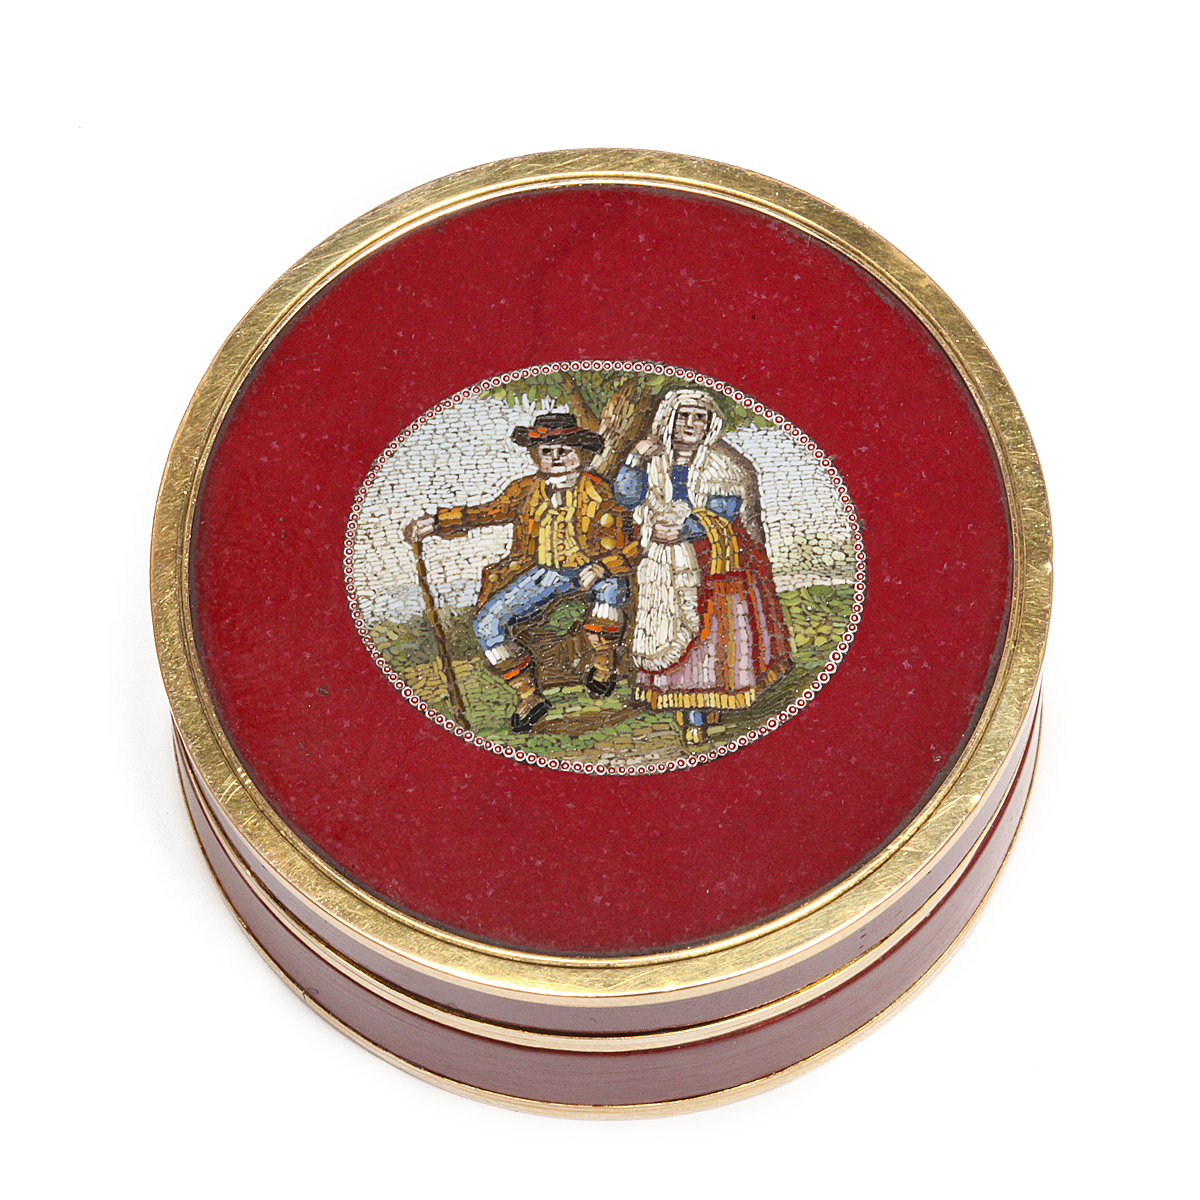 top view of circular red lacquer and purpurine box set with a micromosaic scene in the center